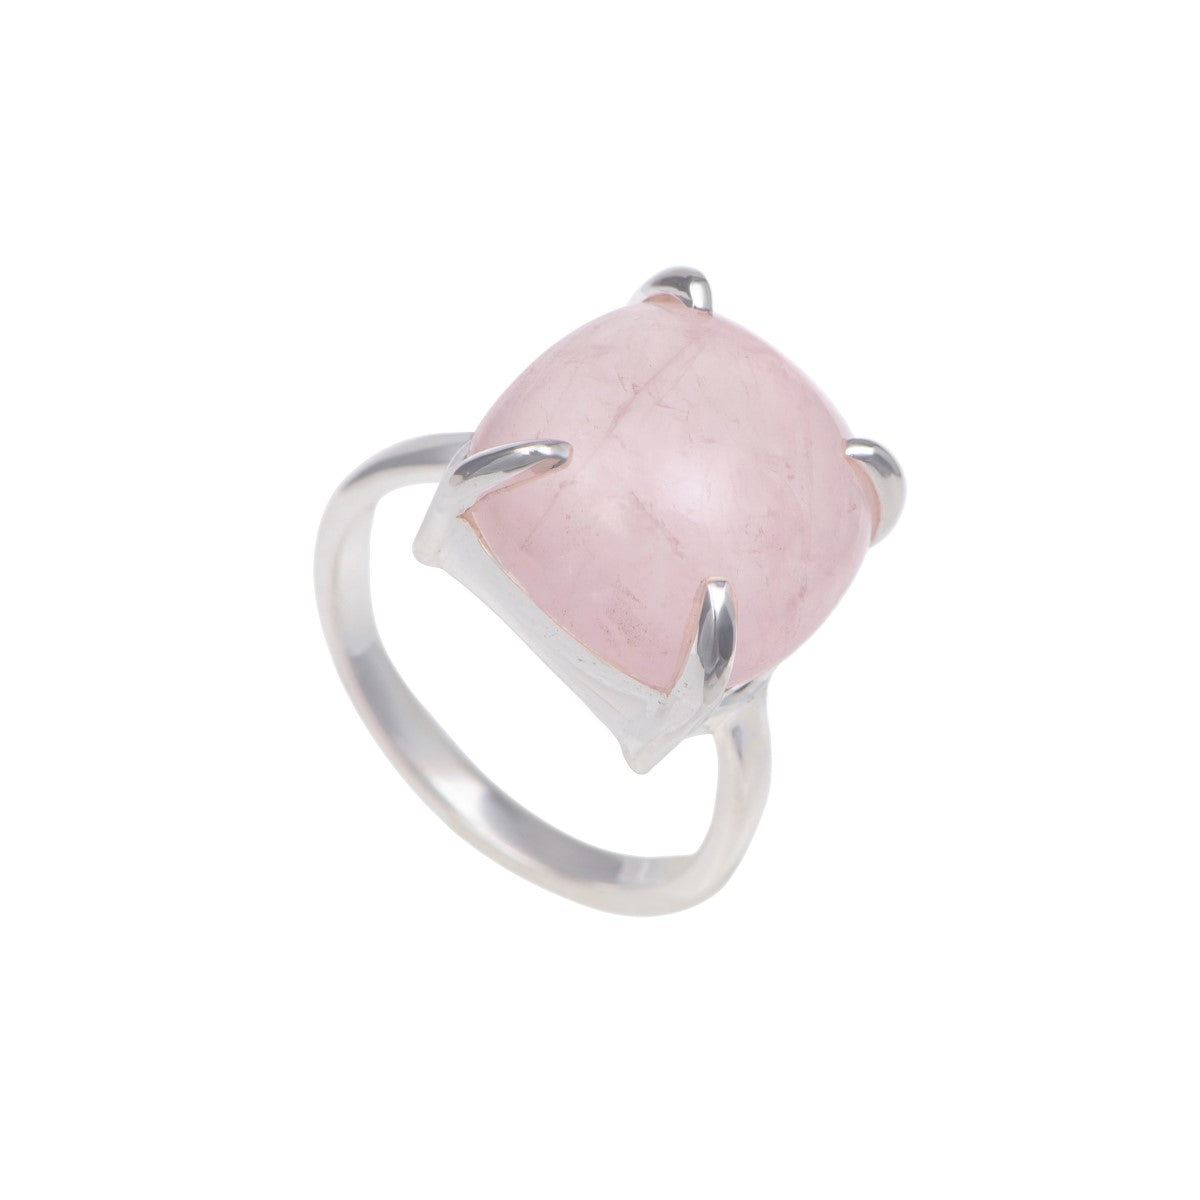 Square Cabochon Rose Quartz Ring in Sterling Silver